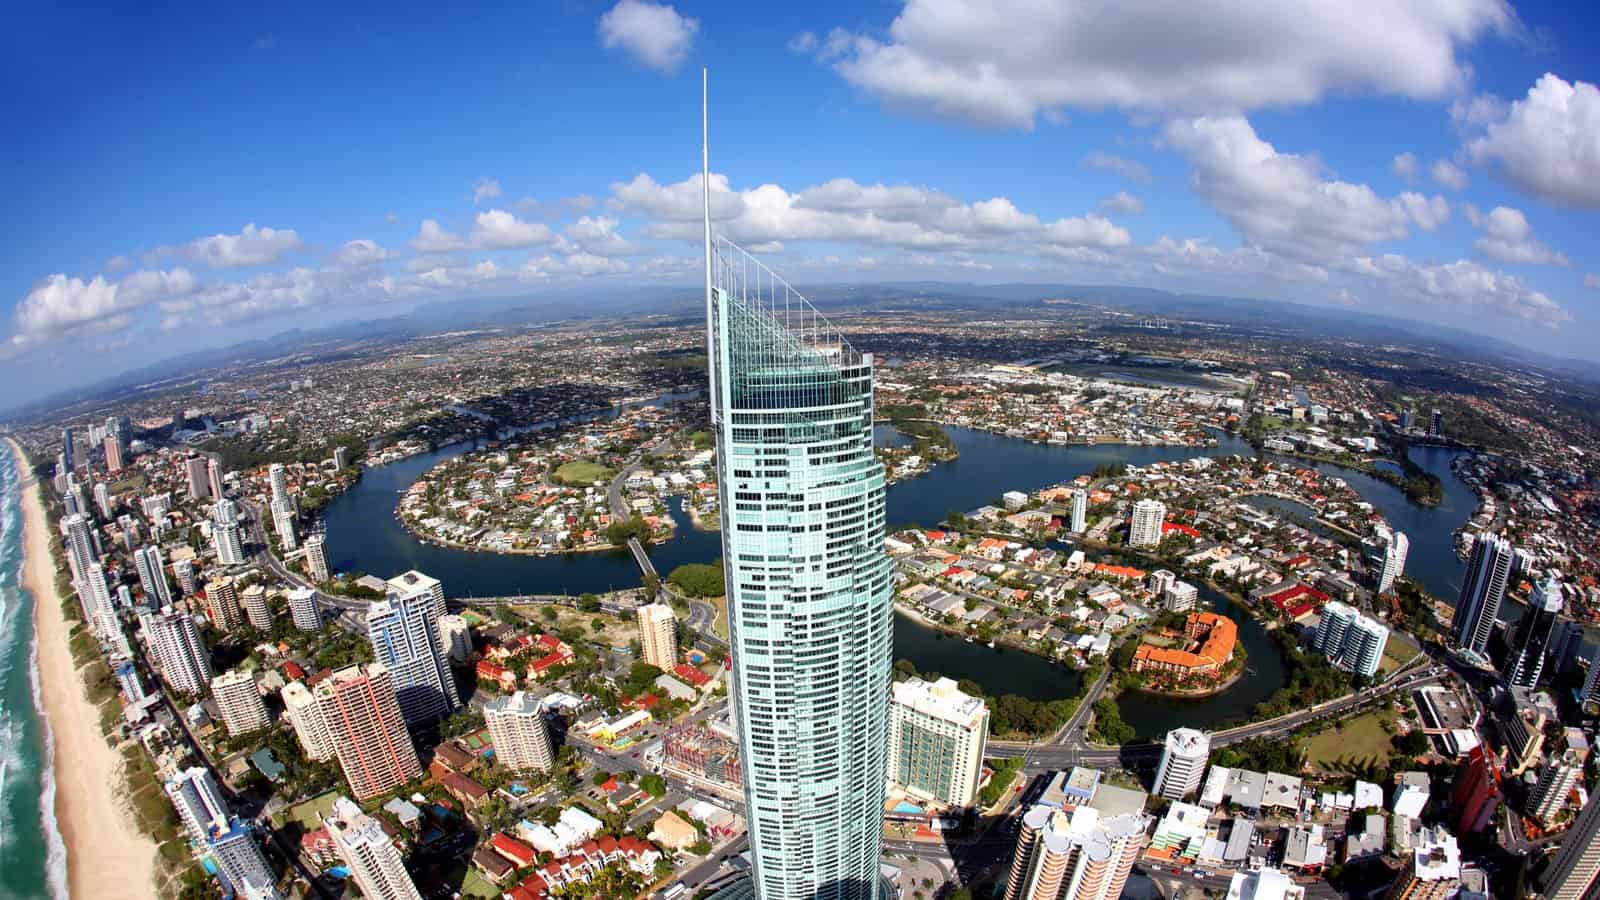 https://www.destinationgoldcoast.com/places-to-see/surfers-paradise/attractions/skypoint-observation-deck